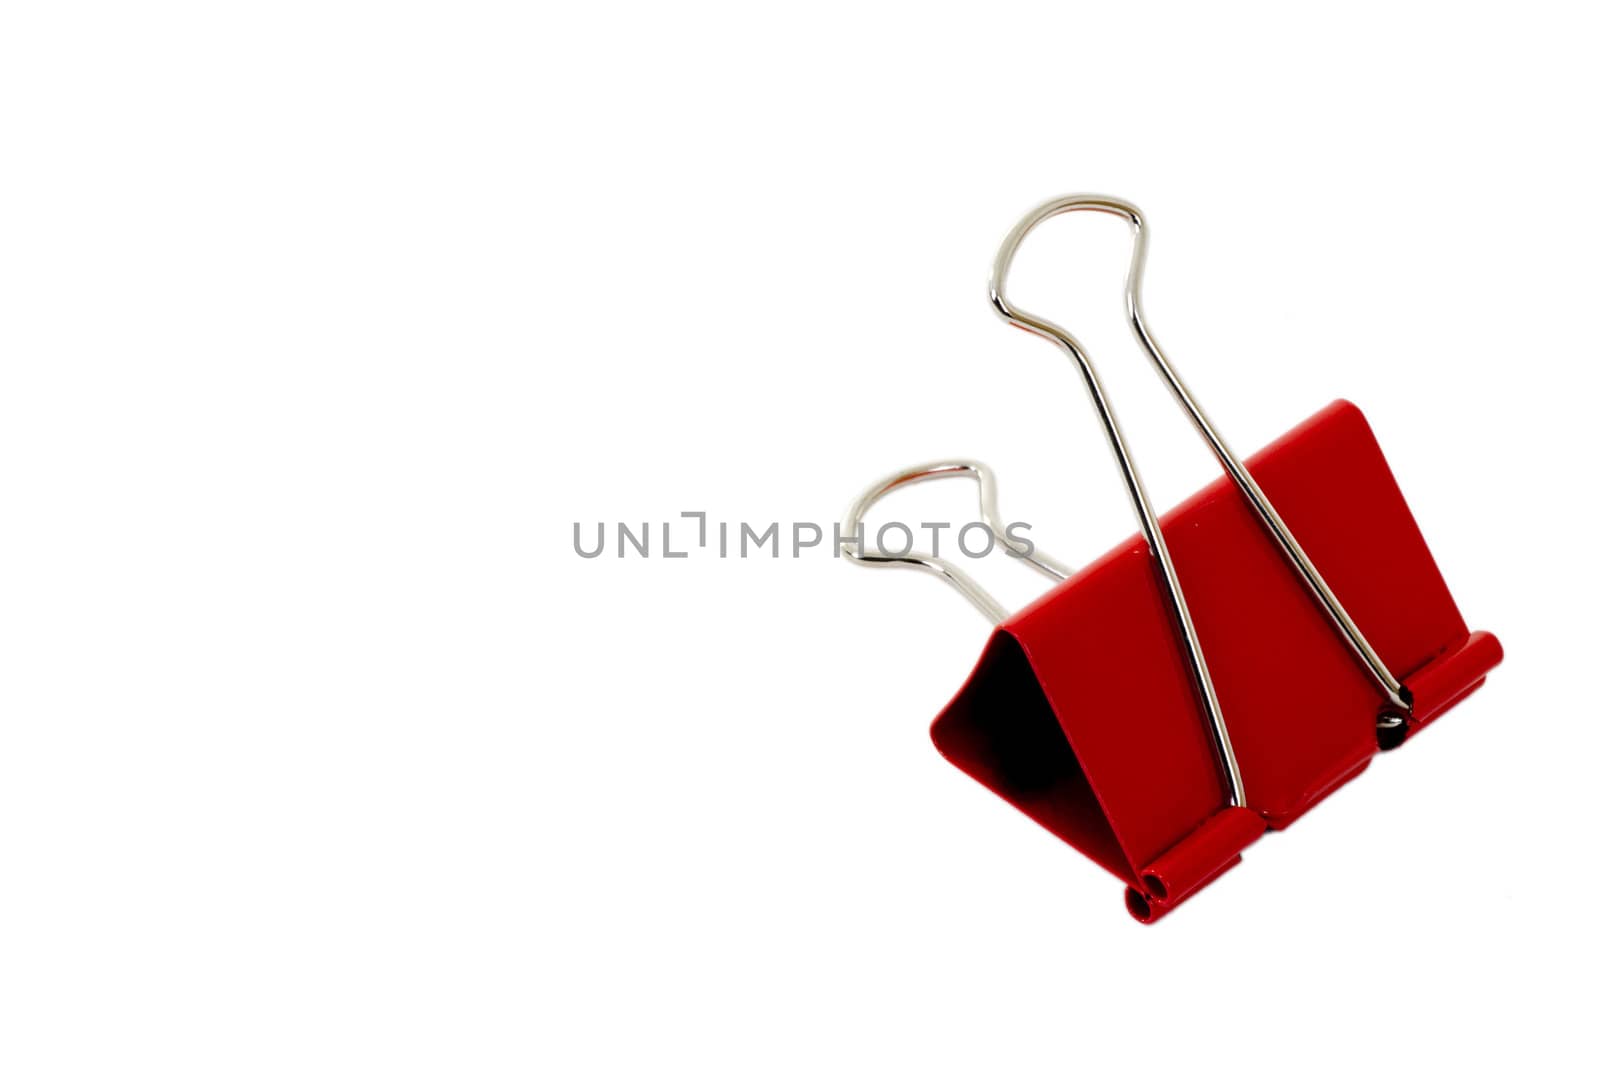 Binder clip isolated on white by eugenef